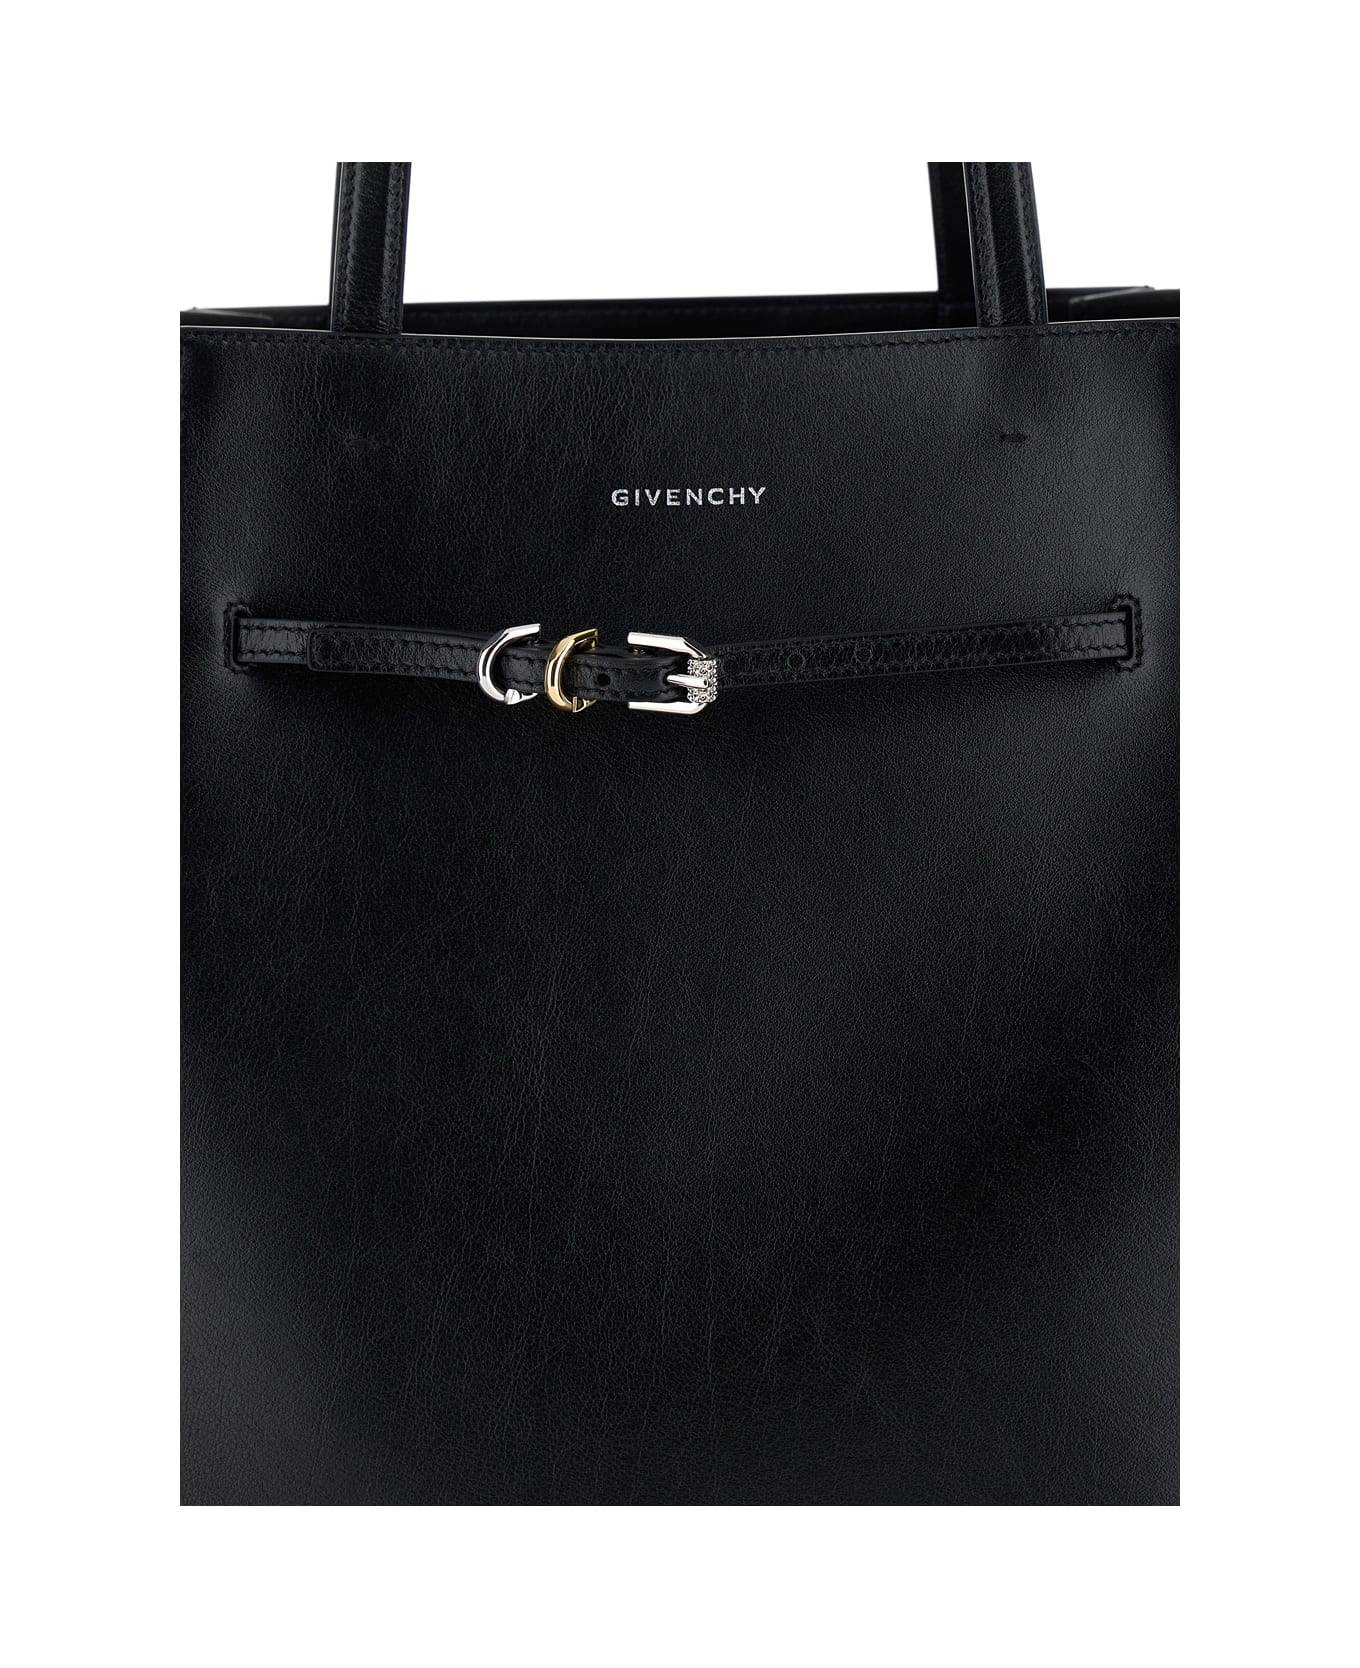 Givenchy 'voyou Medium' Black Tote Bag With Belt Detail In Leather Woman - Black